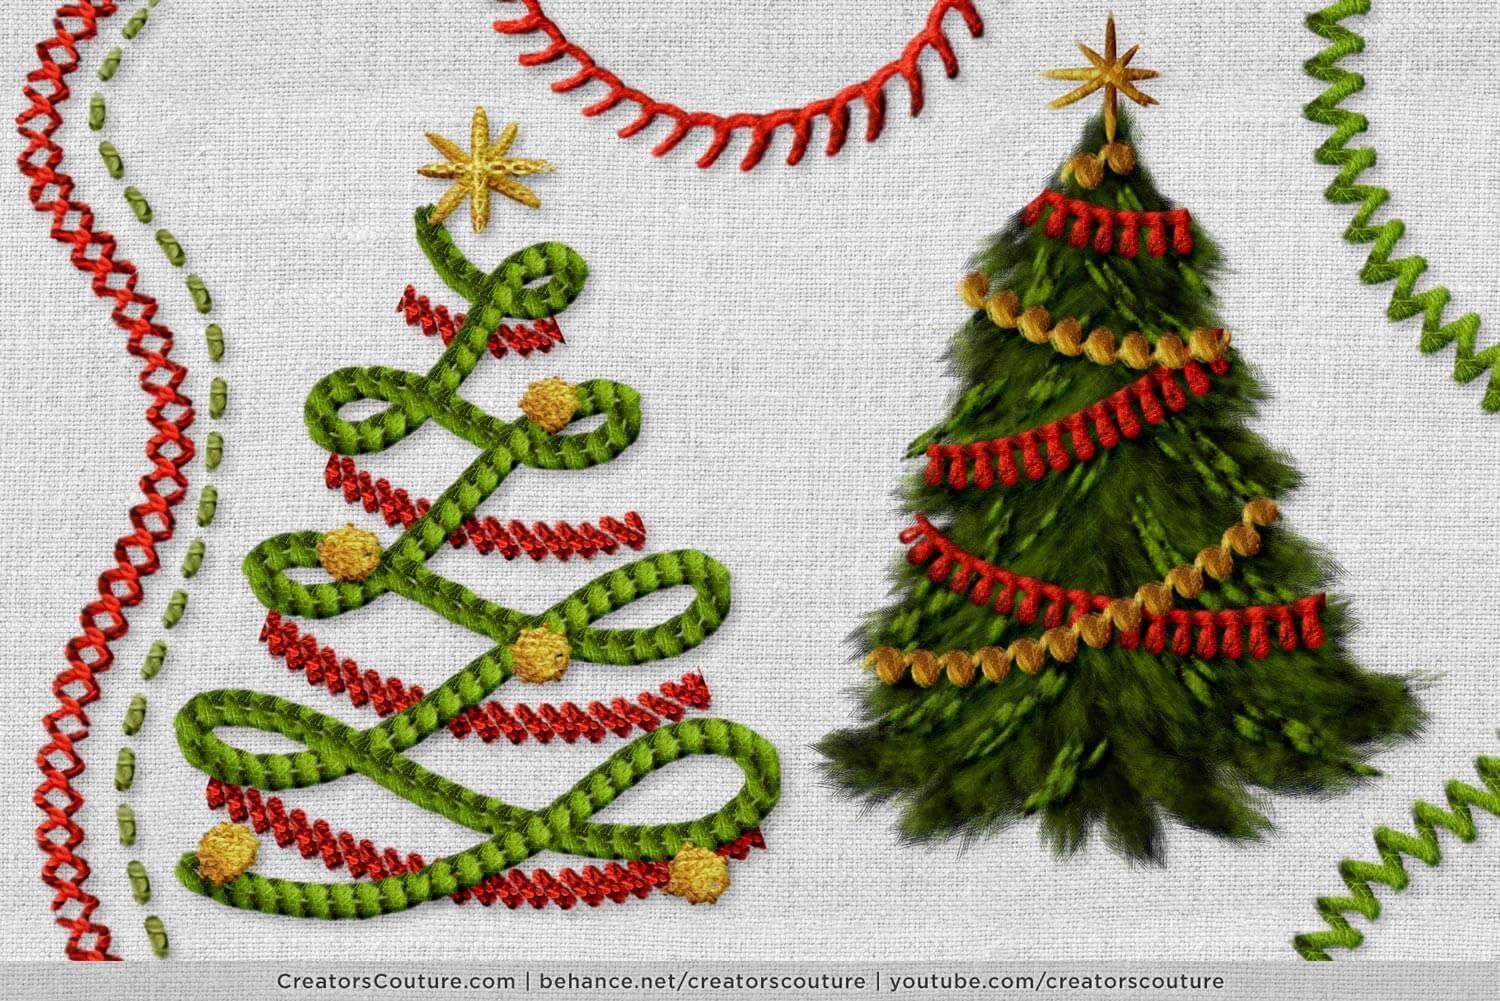 digital art of two Christmas trees and stitch effects created in Photoshop using embroidery inspired brushes